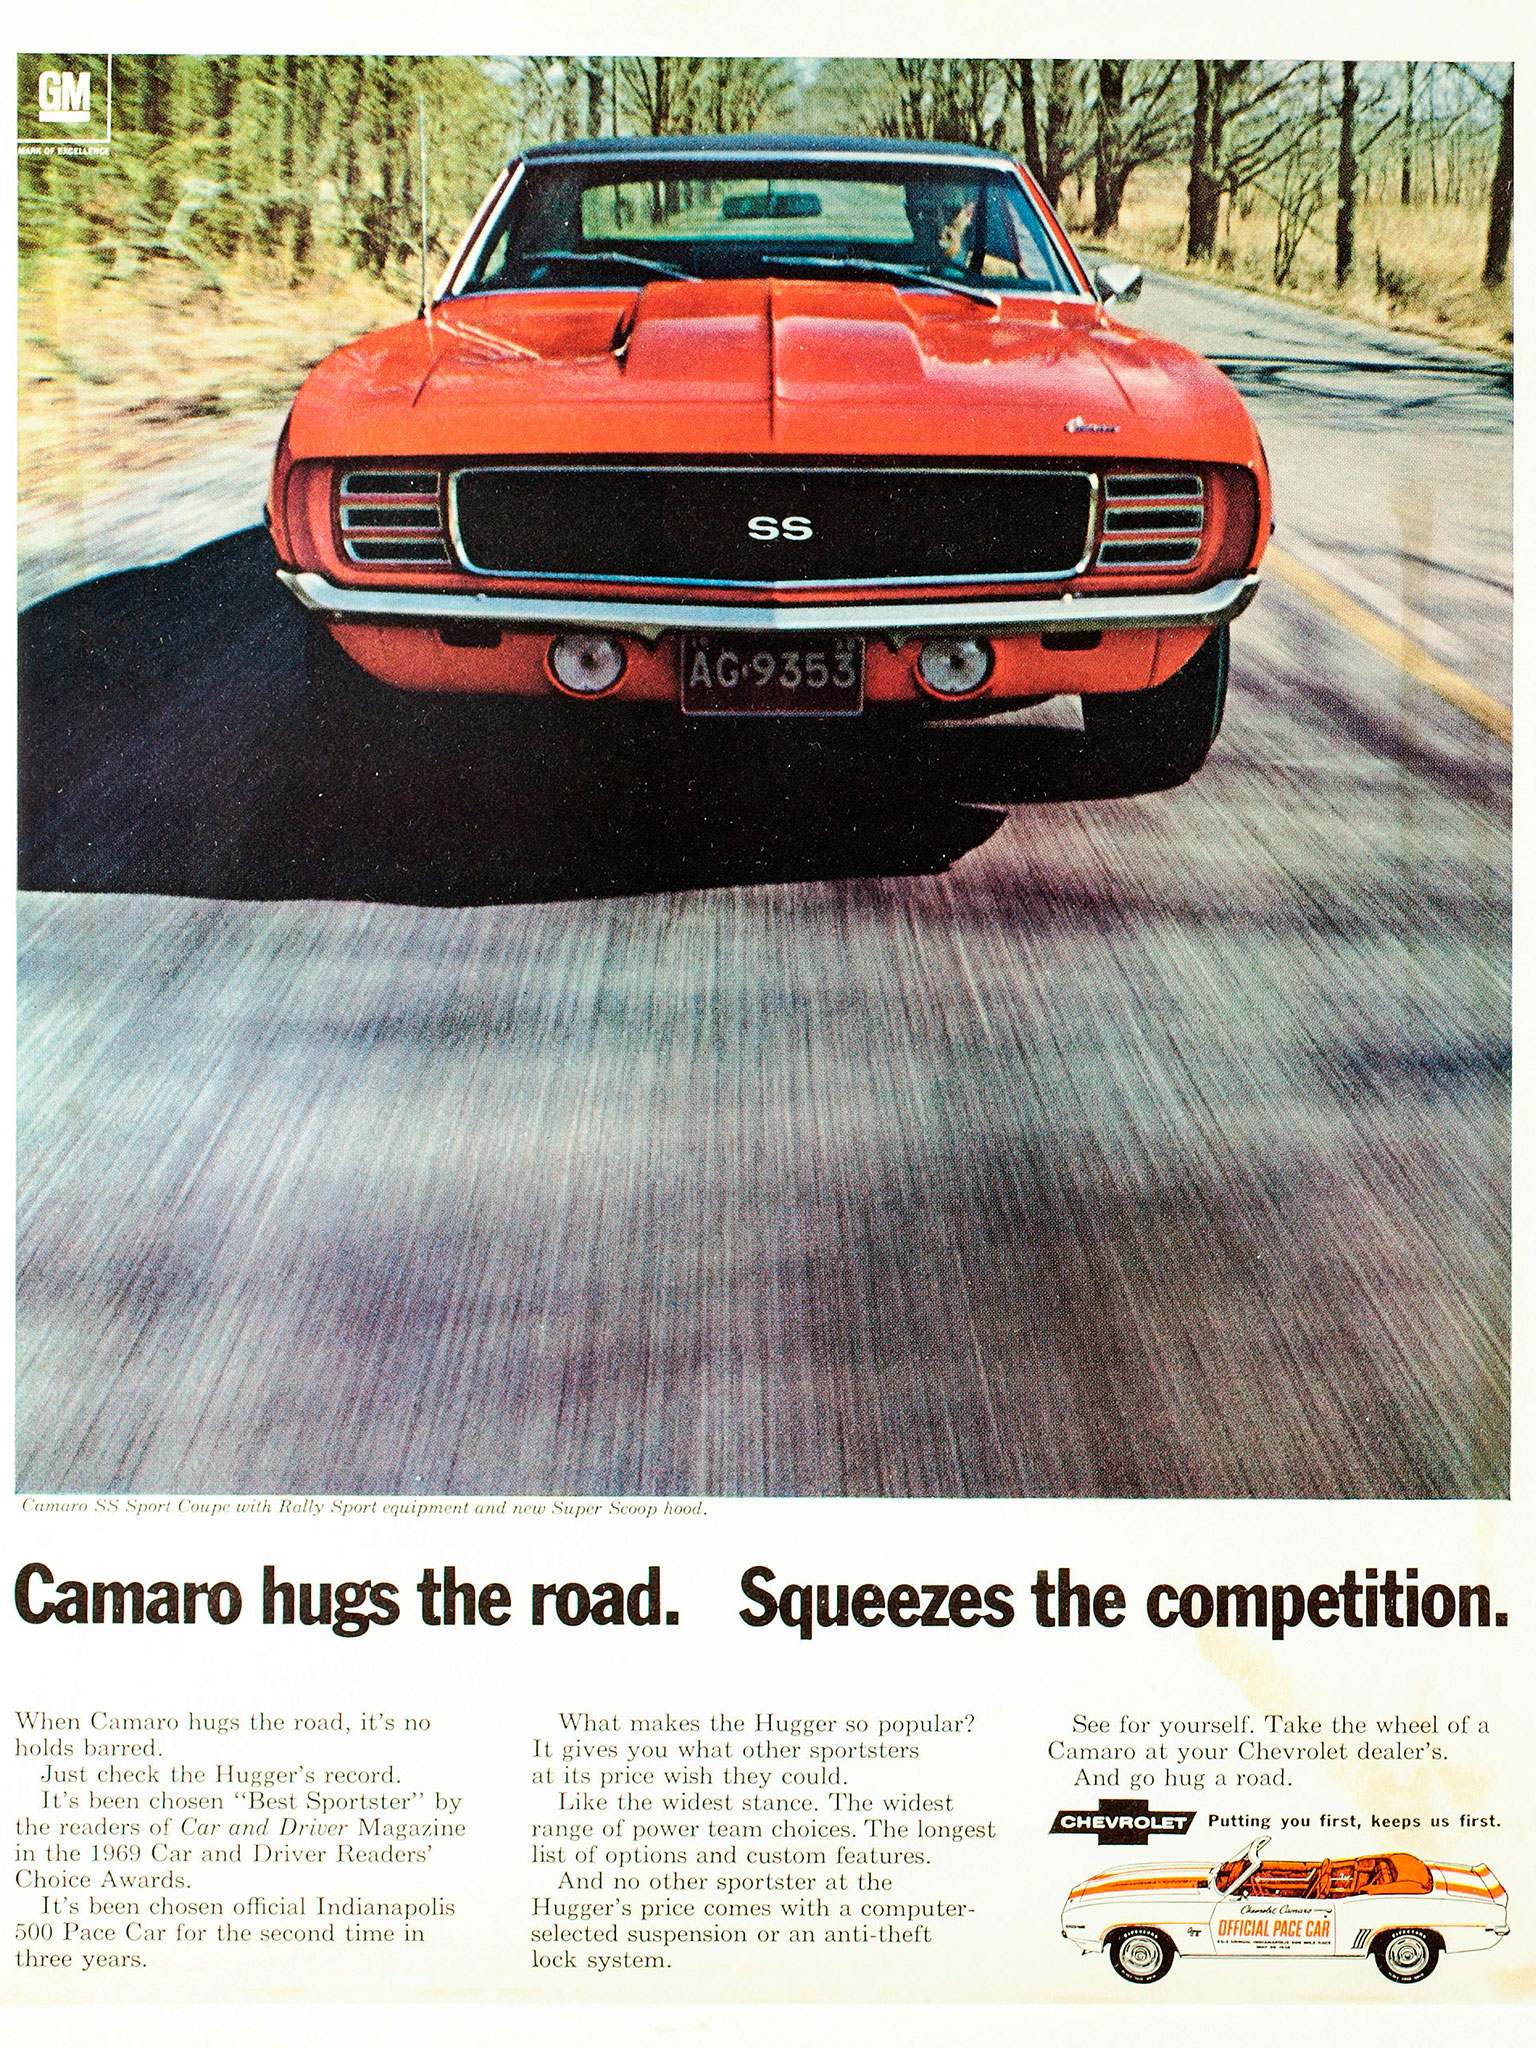 200 1969 ad Camaro hugs the road squeezes competition